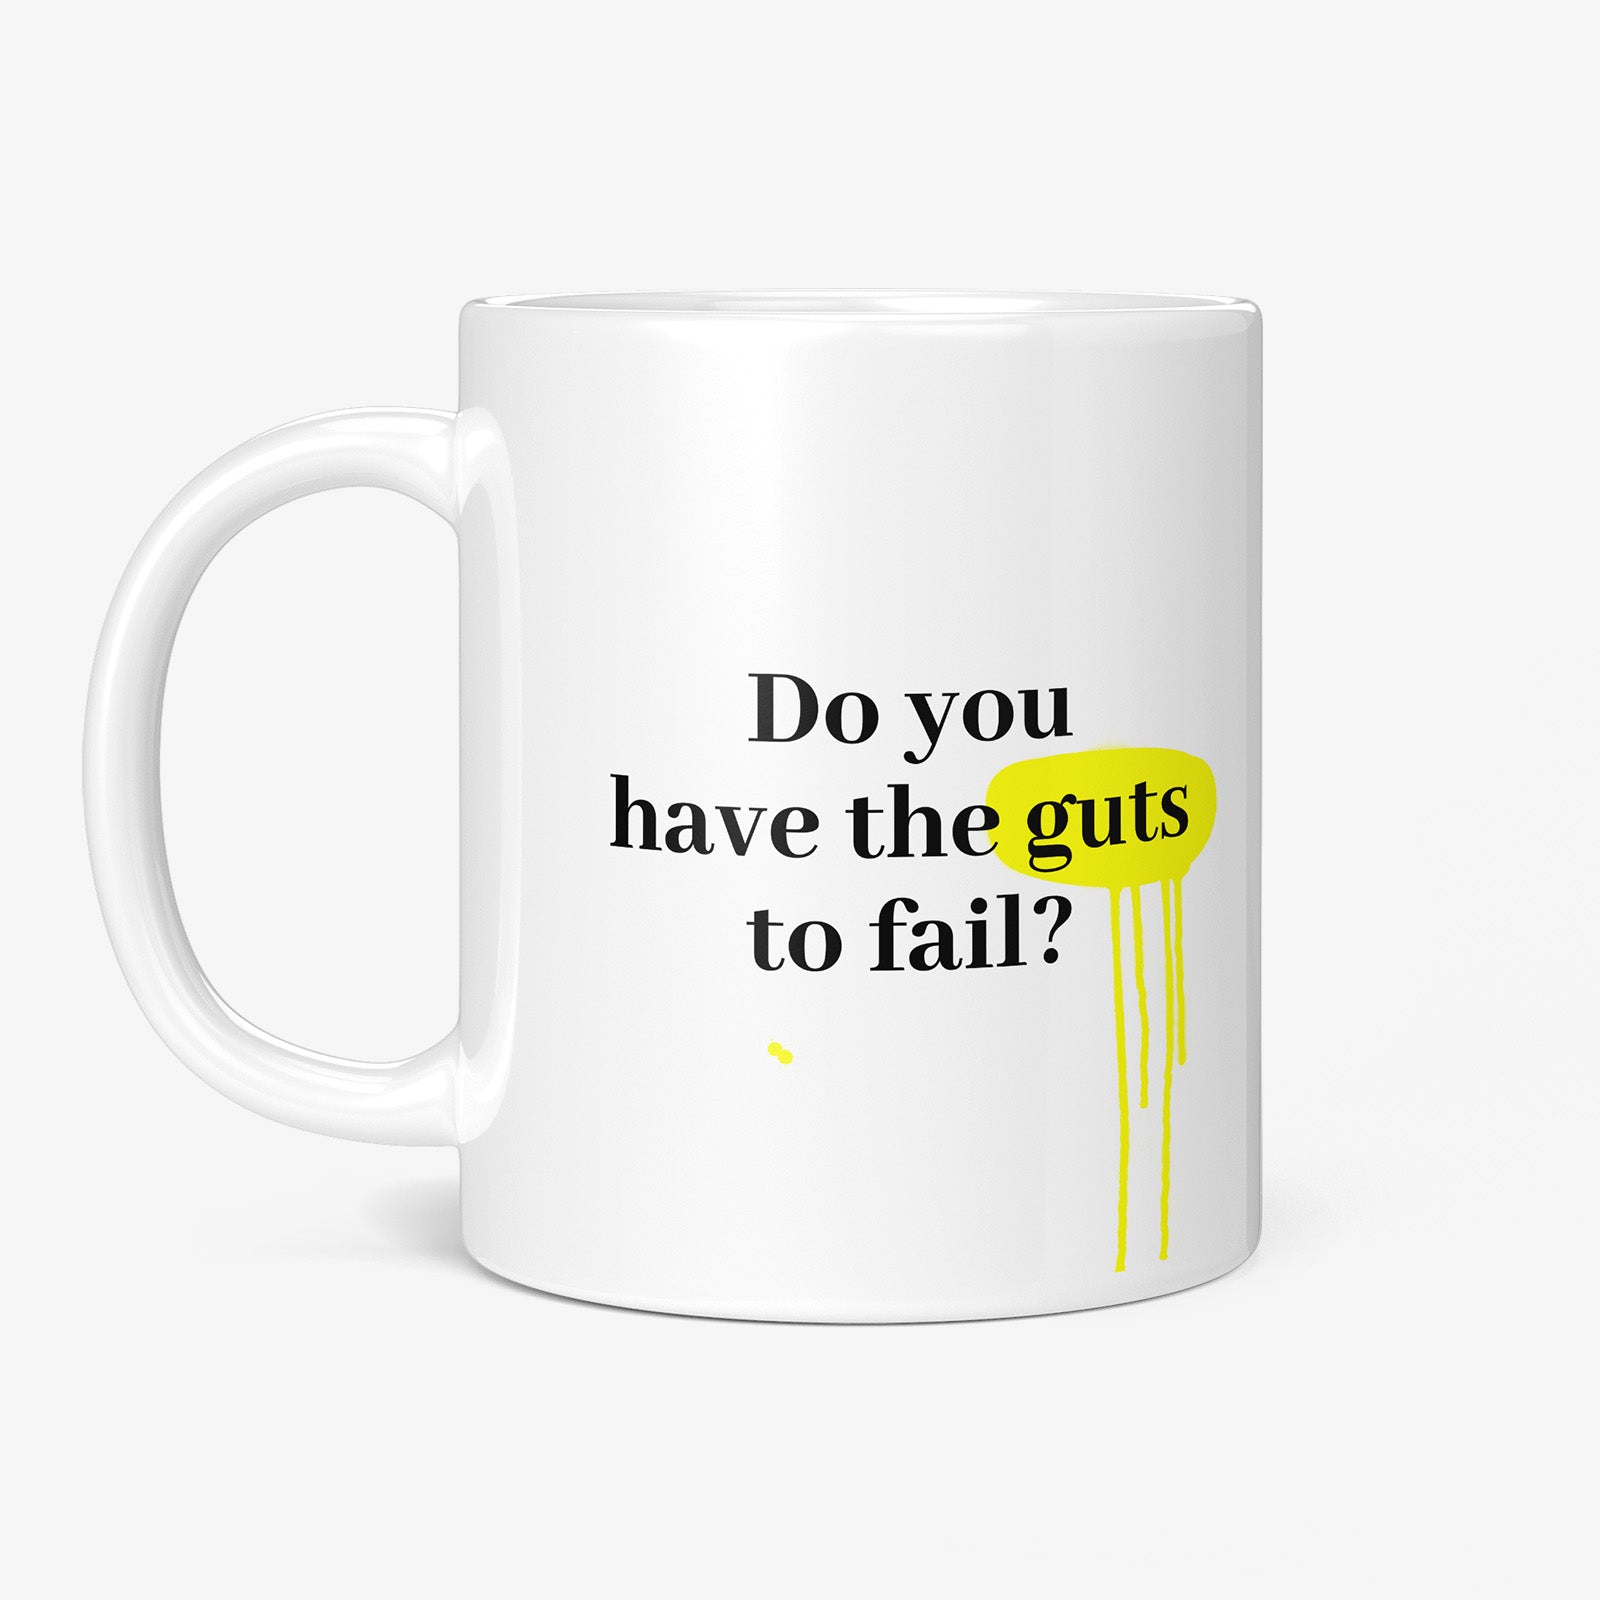 Be inspired by Denzel Washington's famous quote, "Do you have the guts to fail?" on this white and glossy 11oz coffee mug with the handle on the left.